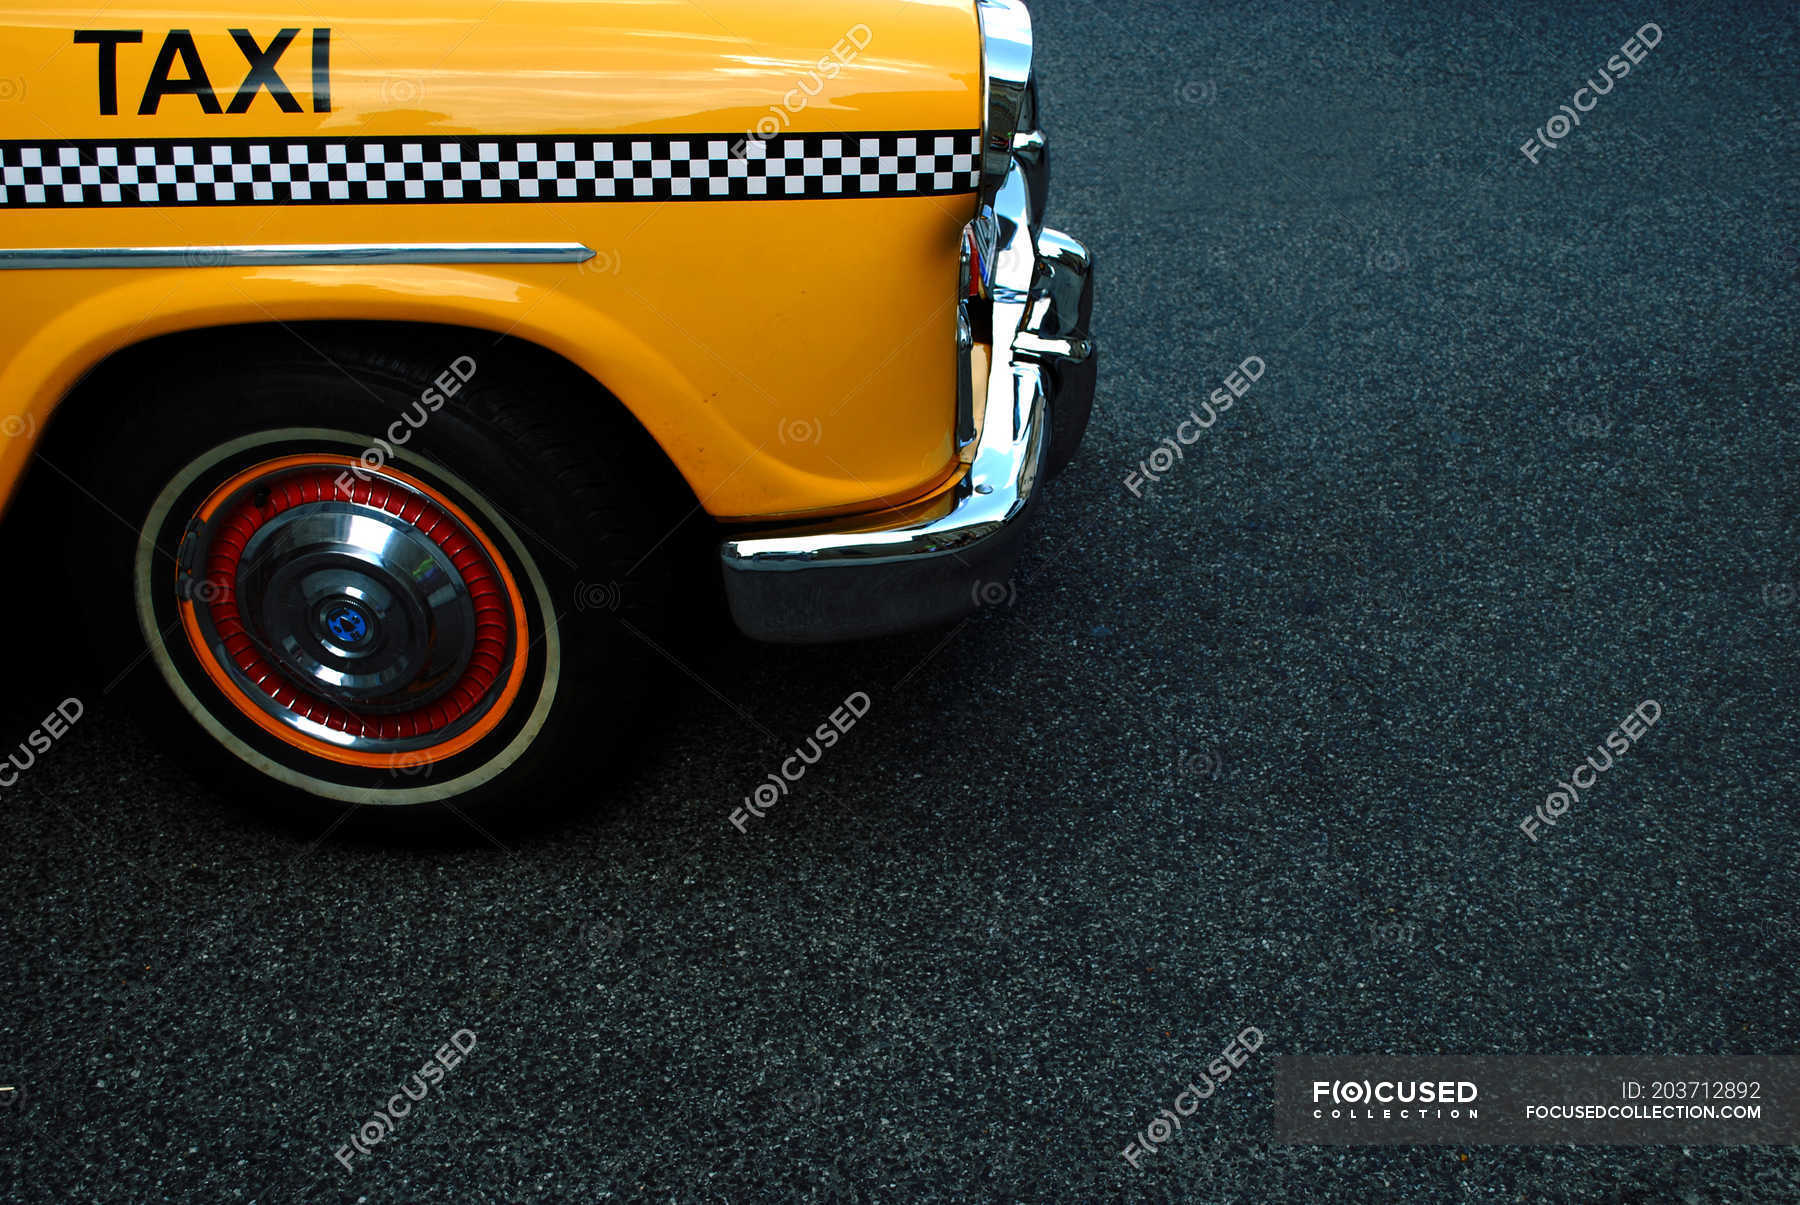 Yellow Old Fashioned Taxi Car On Road Transport Design Stock